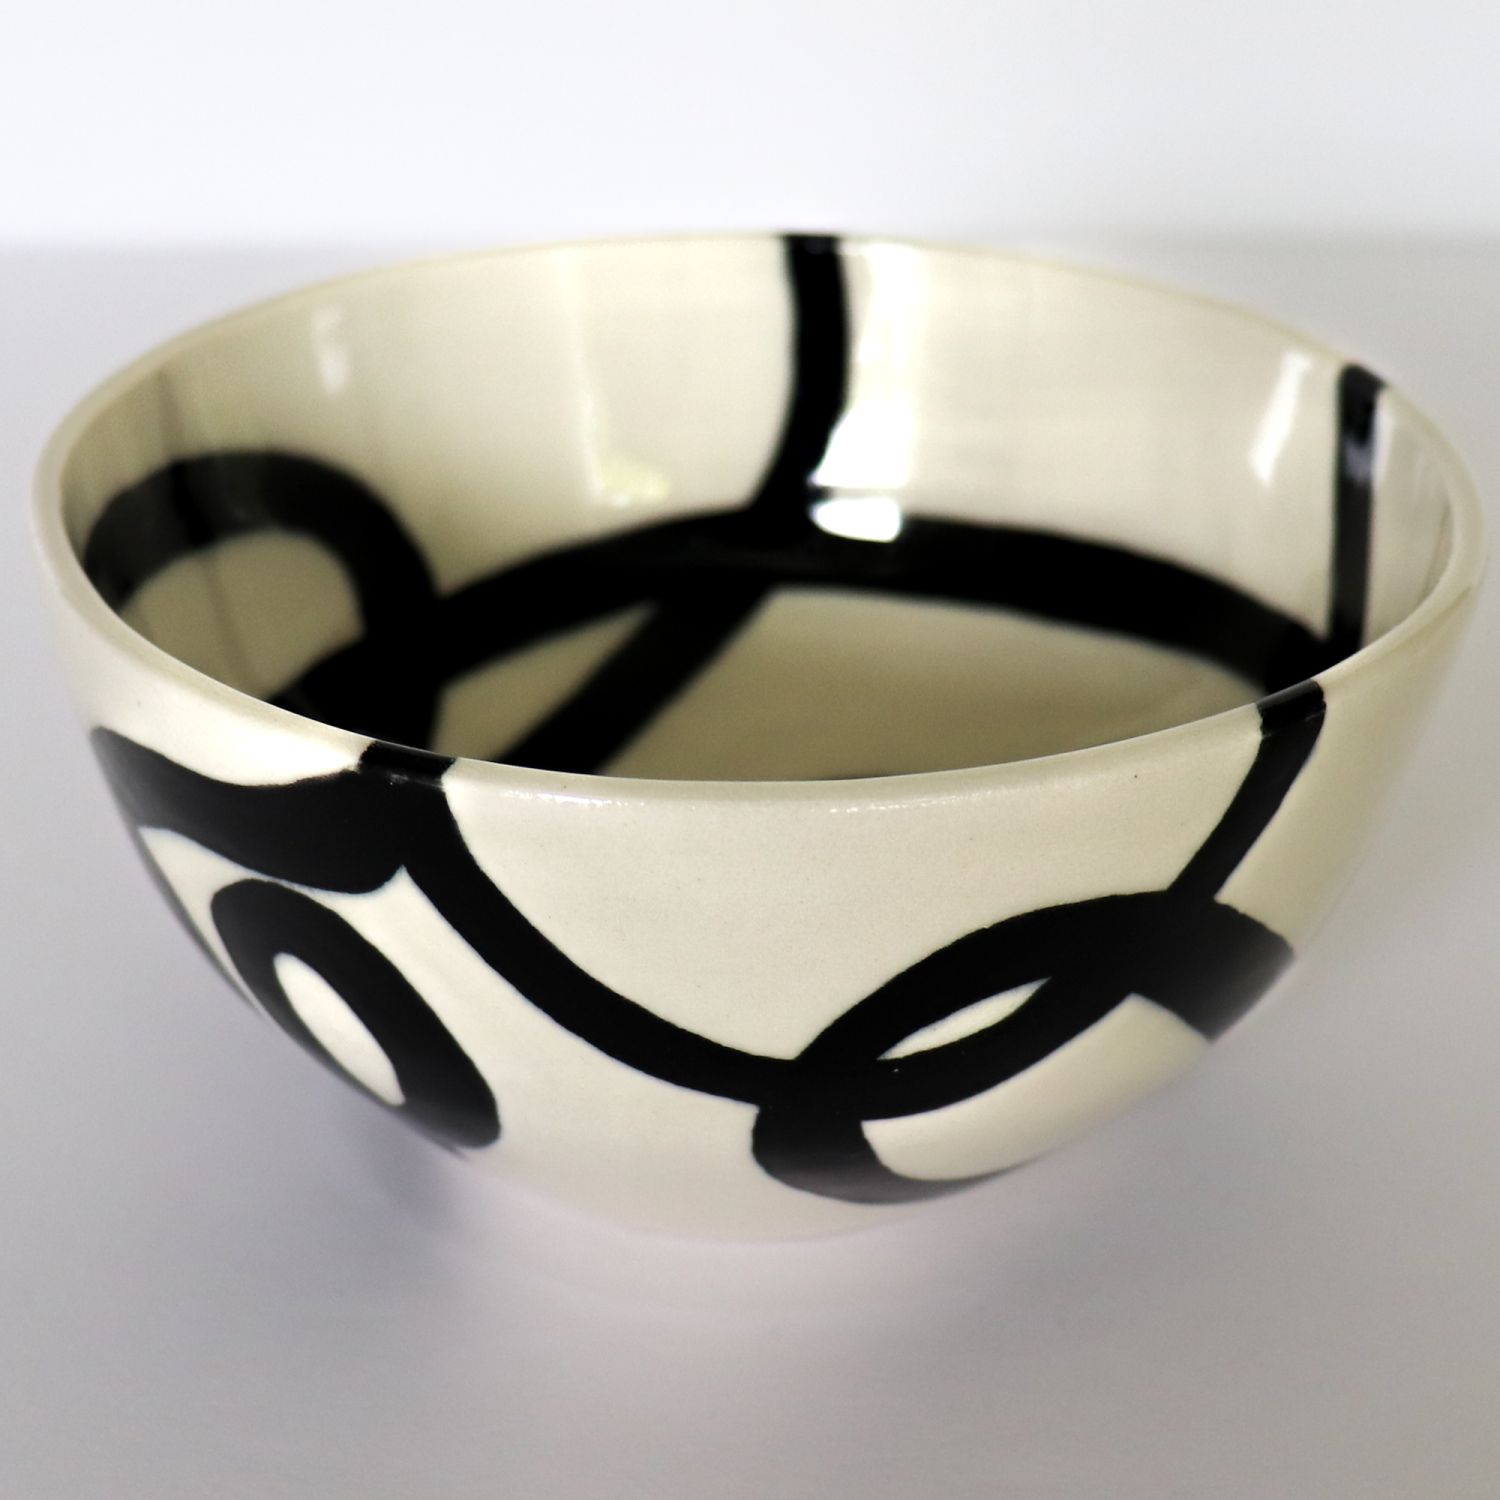 Alana Marcoccia: Interconnected Bowl – Small Product Image 4 of 5